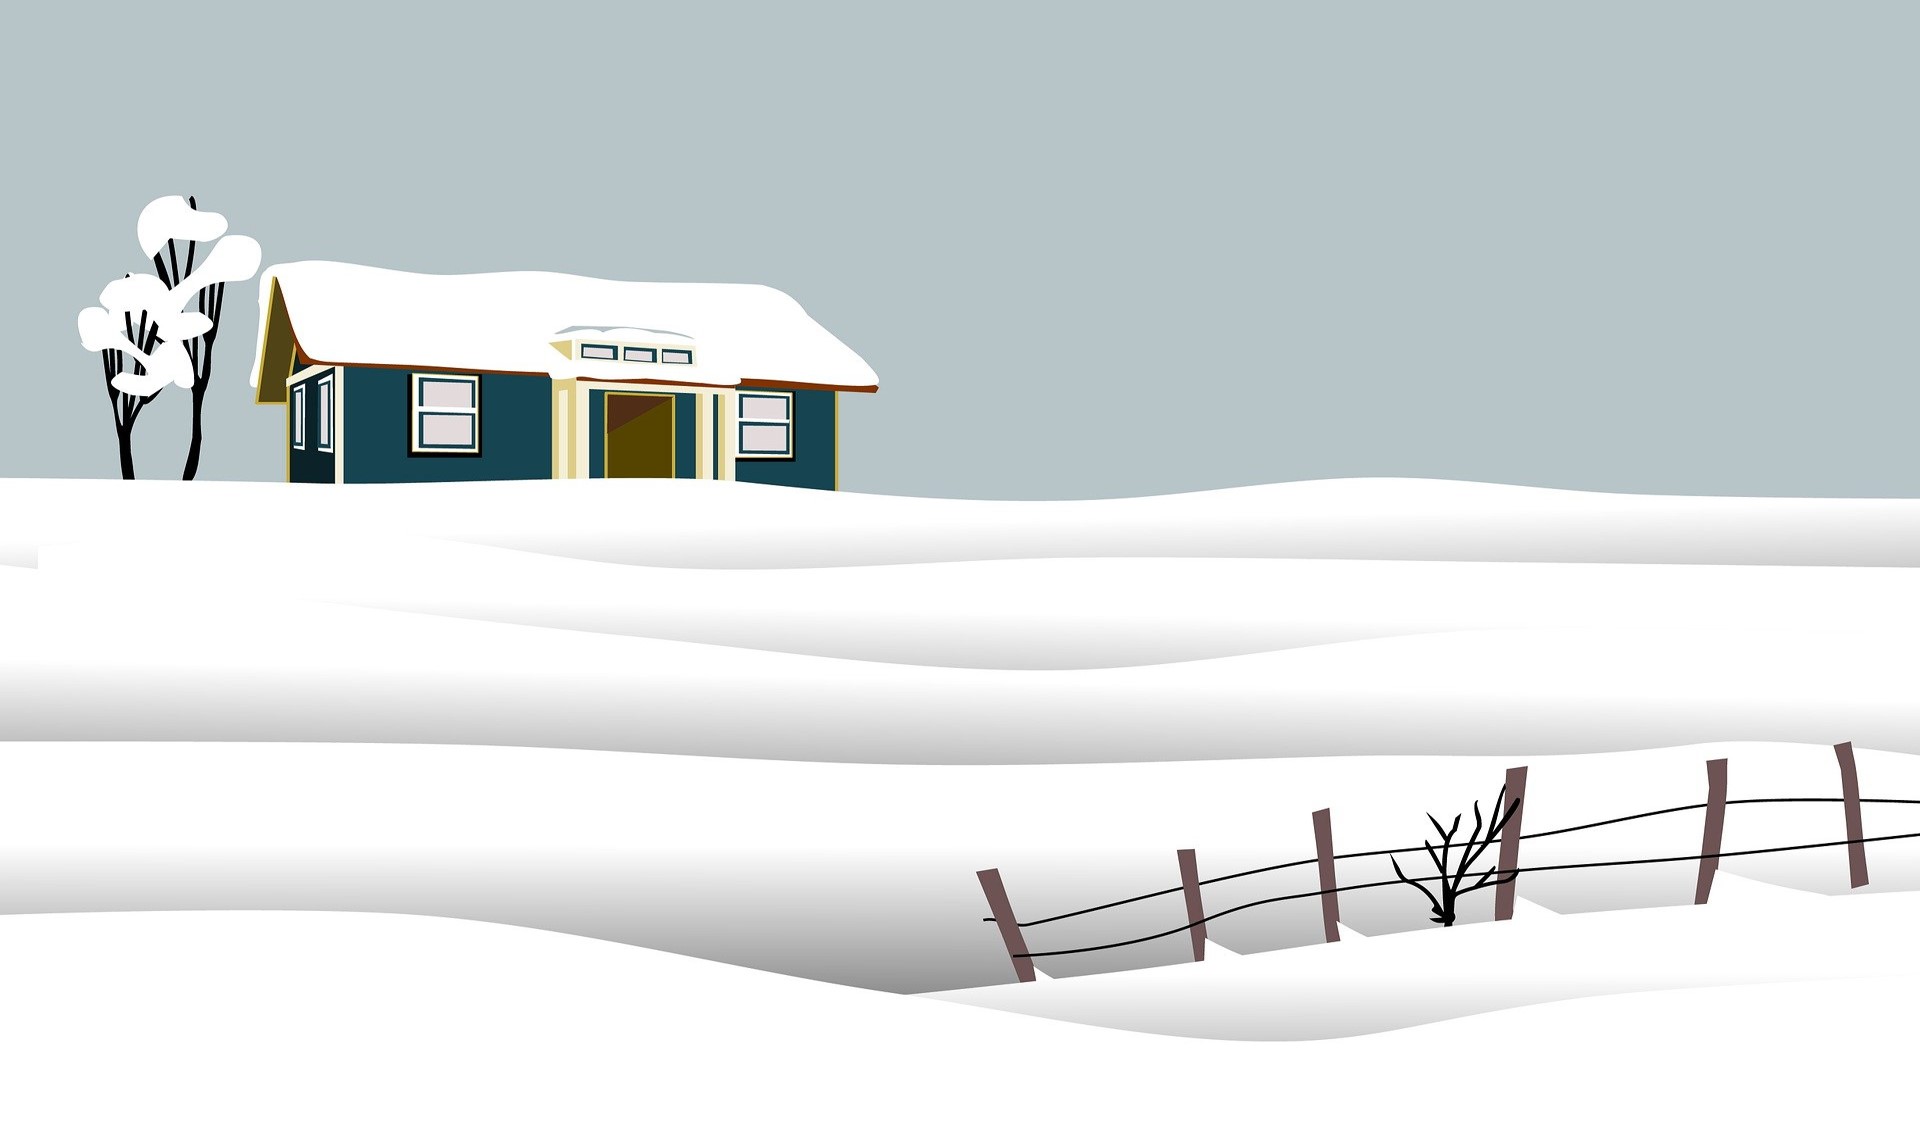 House in snow pic